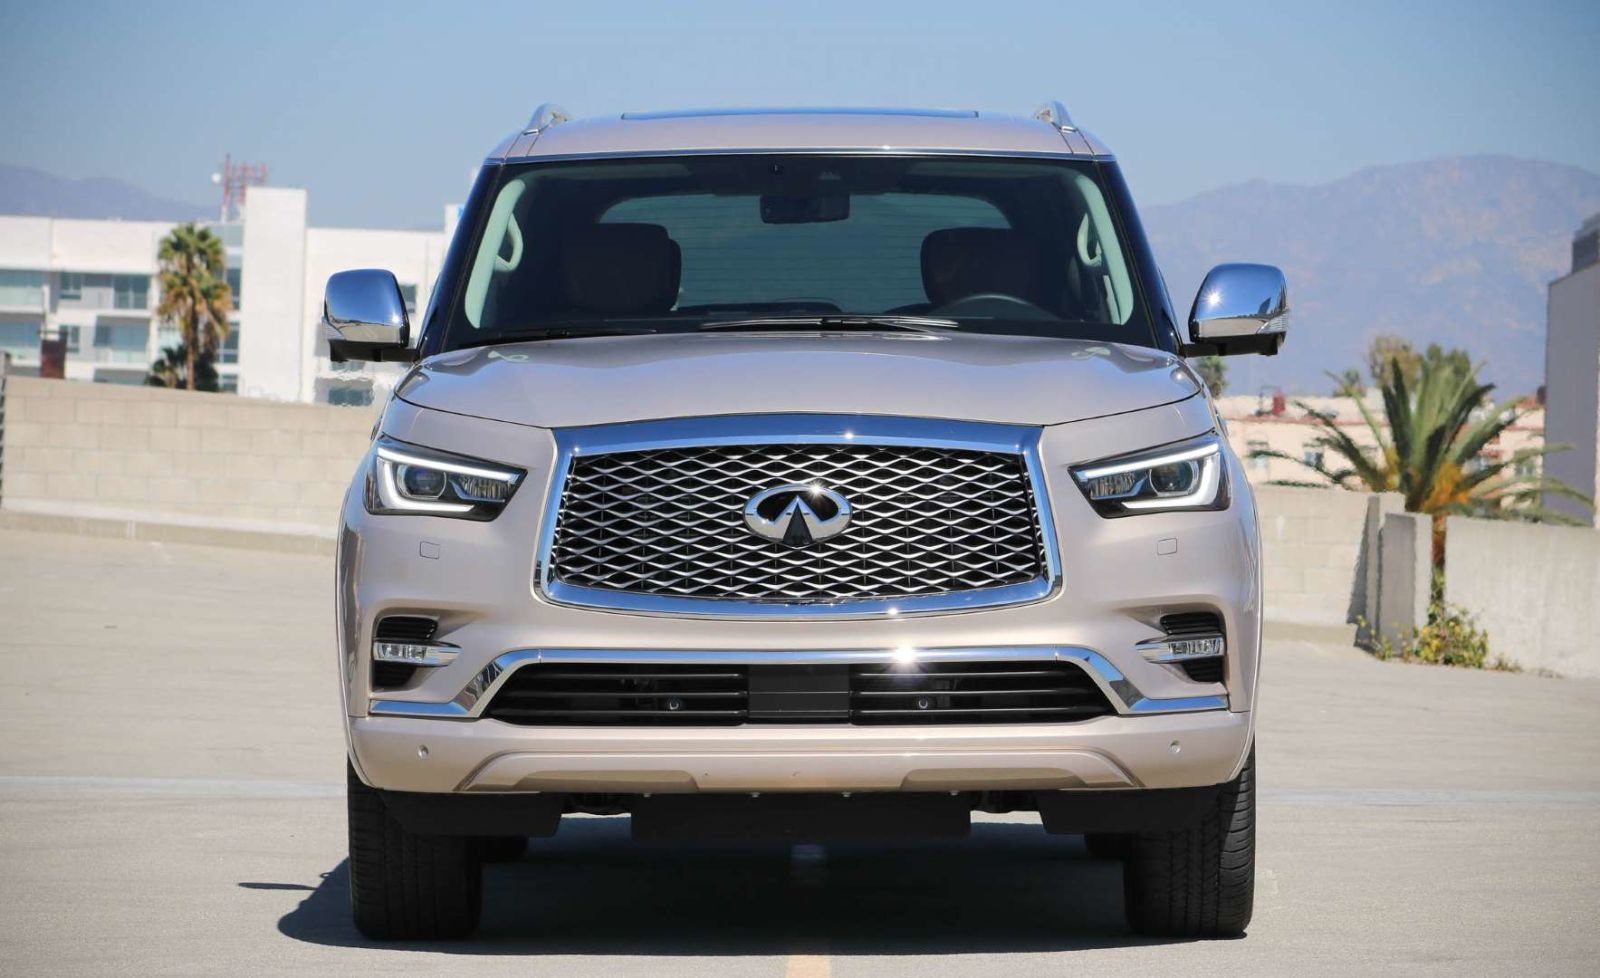 Illustration for article titled The Infiniti QX80 looks less like a beluga whale now